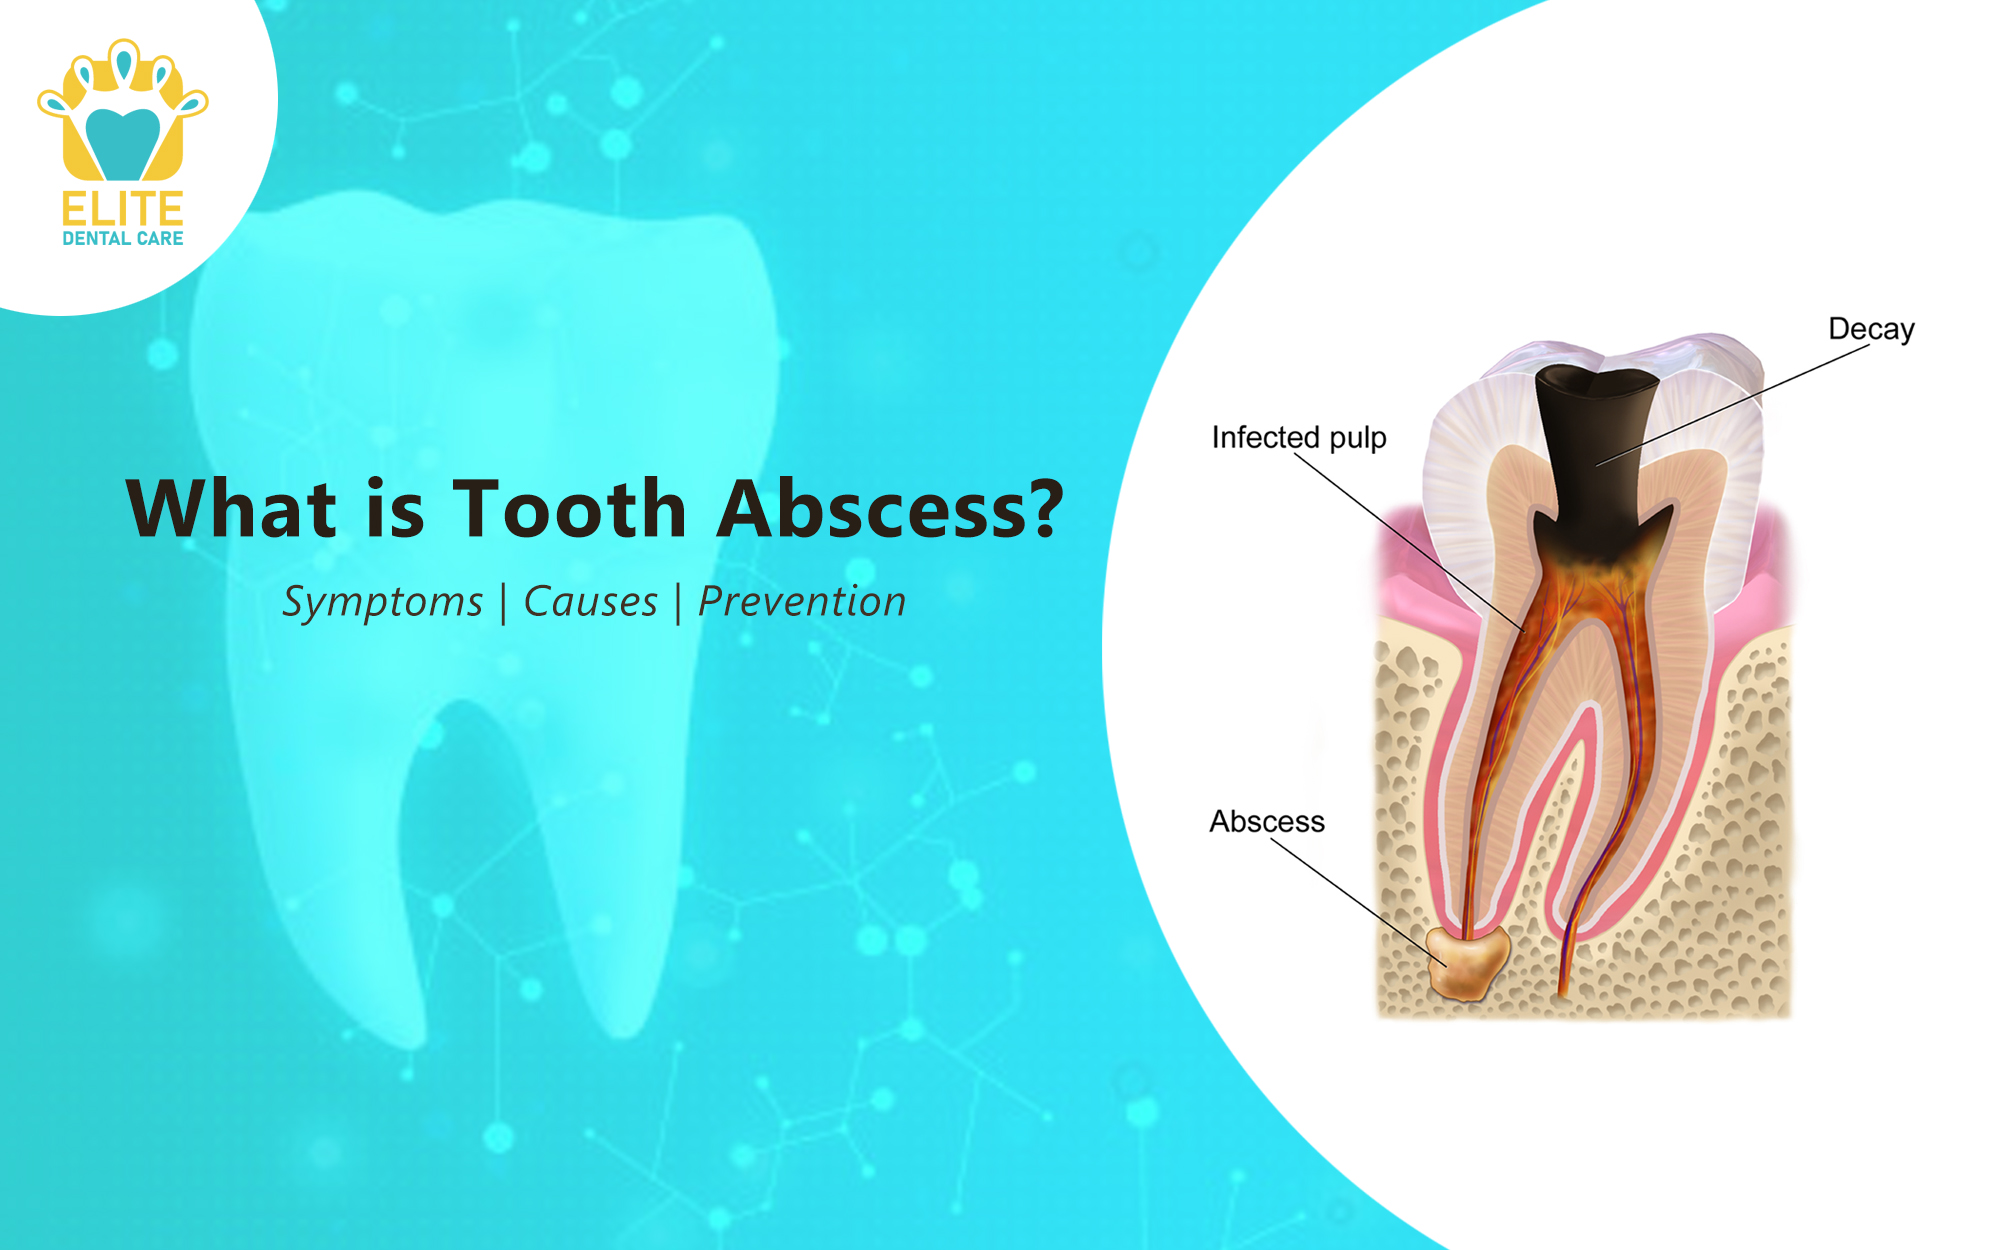 TOOTH ABSCESS: SYMPTOMS, CAUSES & PREVENTION